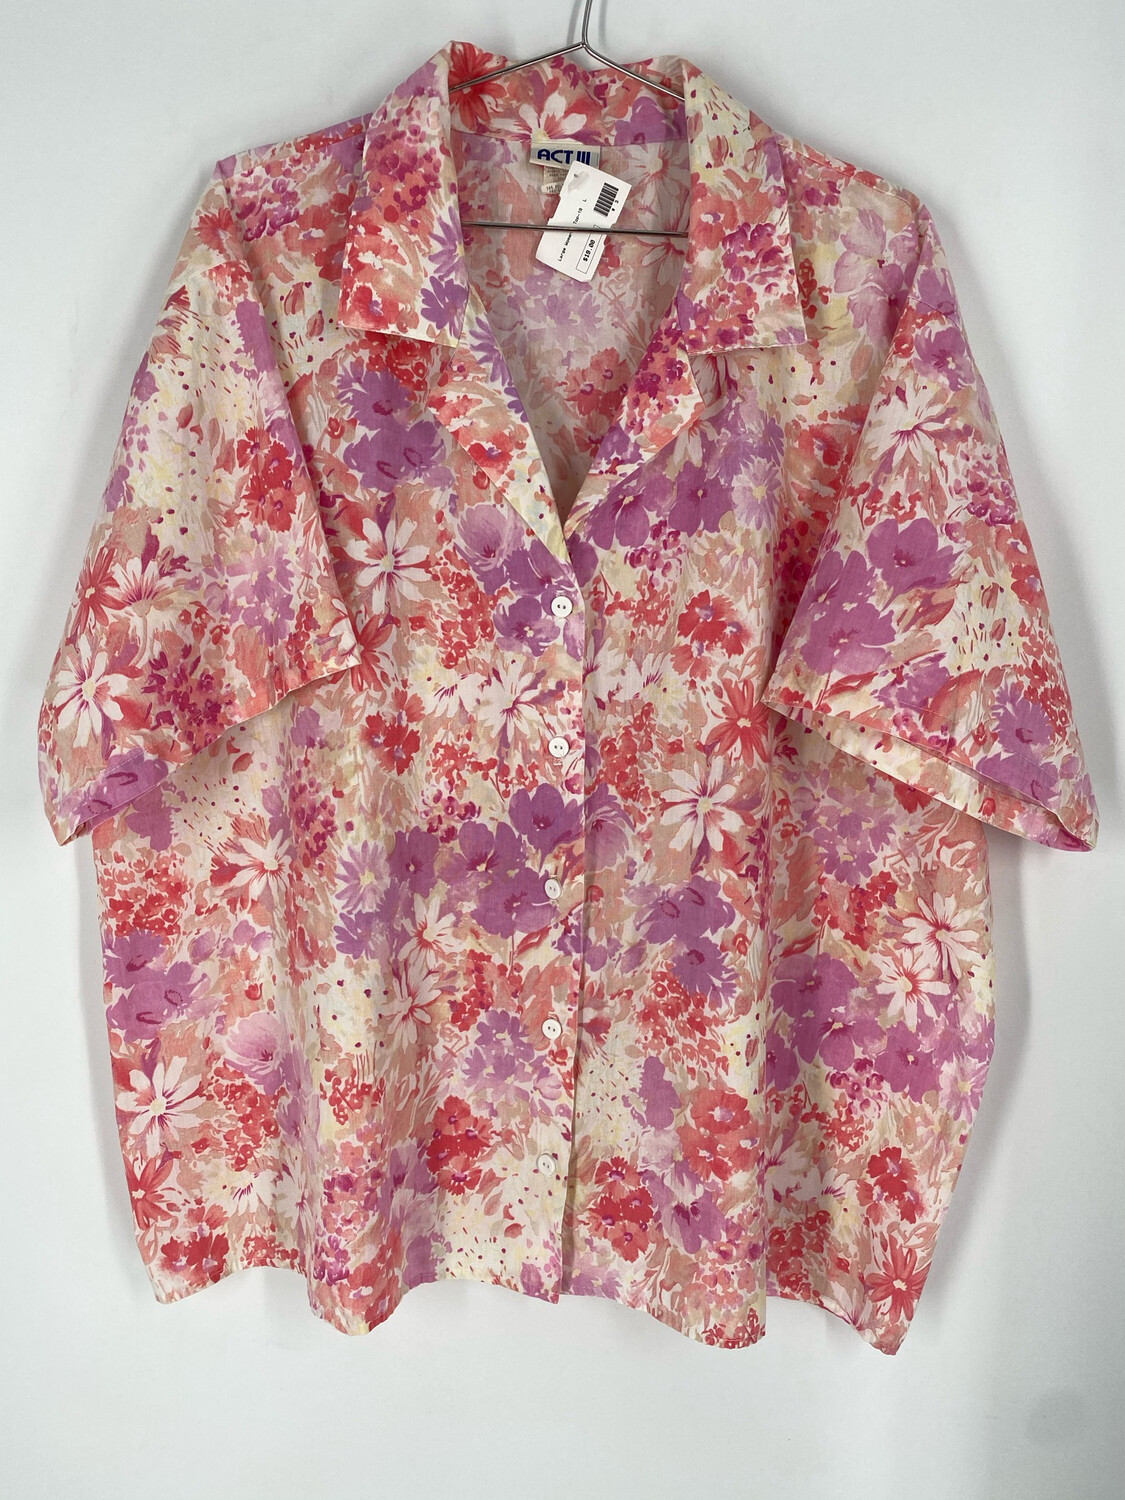 Act III Floral Button Up Top Size 22W/42